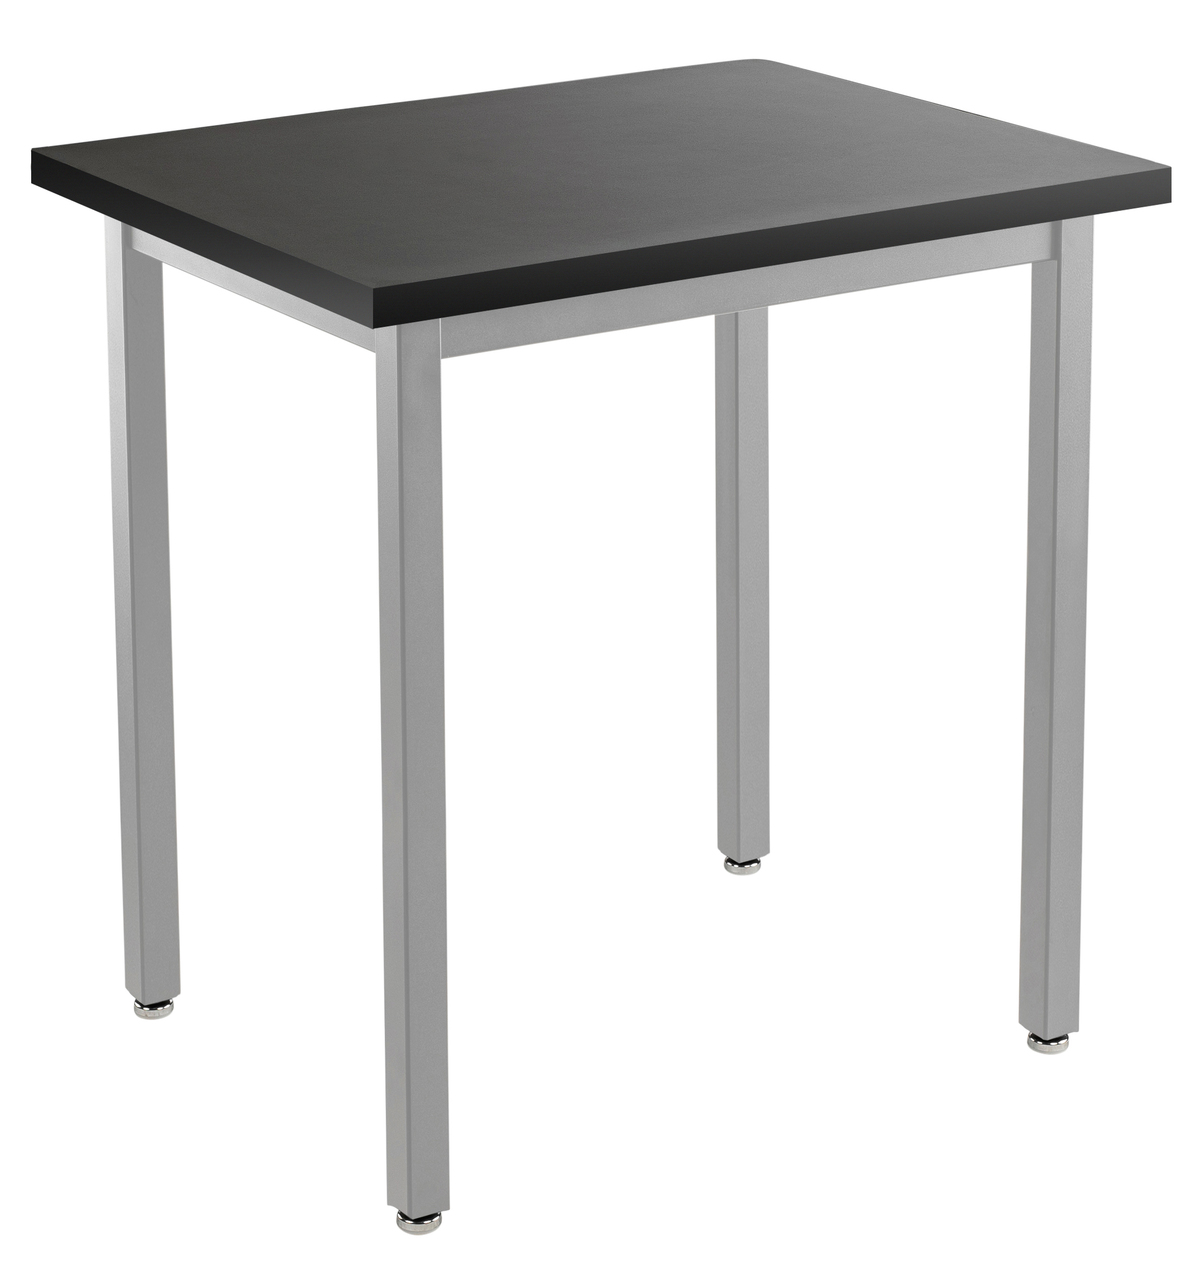 NPS Steel Science Lab Table -  36" x 36" -  Phenolic Top - Black Surface Color